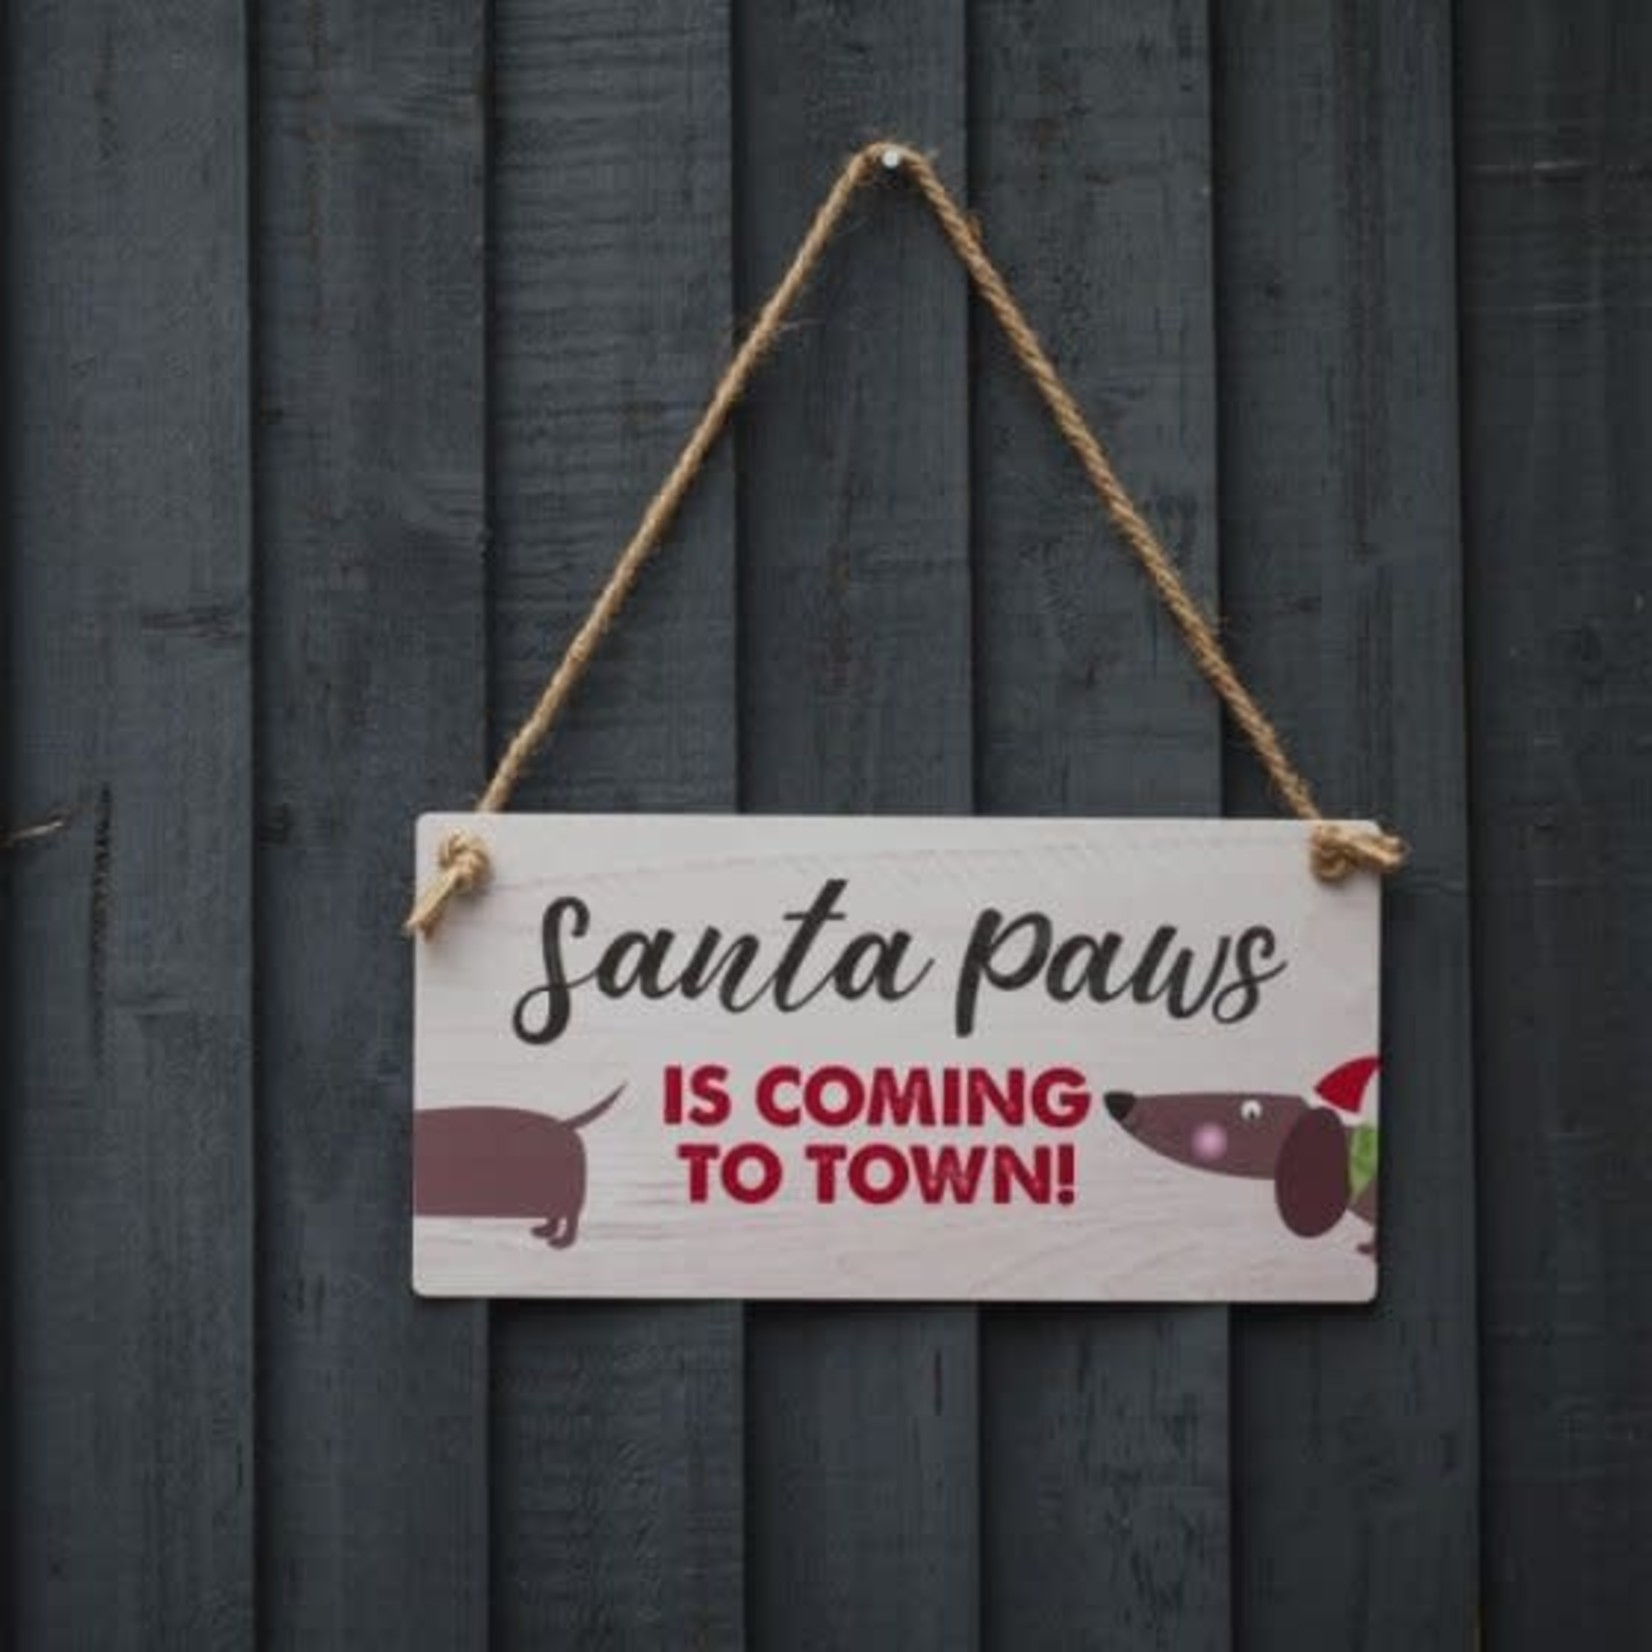 Zöon Santa Paws Is Coming To Town! Christmas Pet Sign, 30 x 15cm